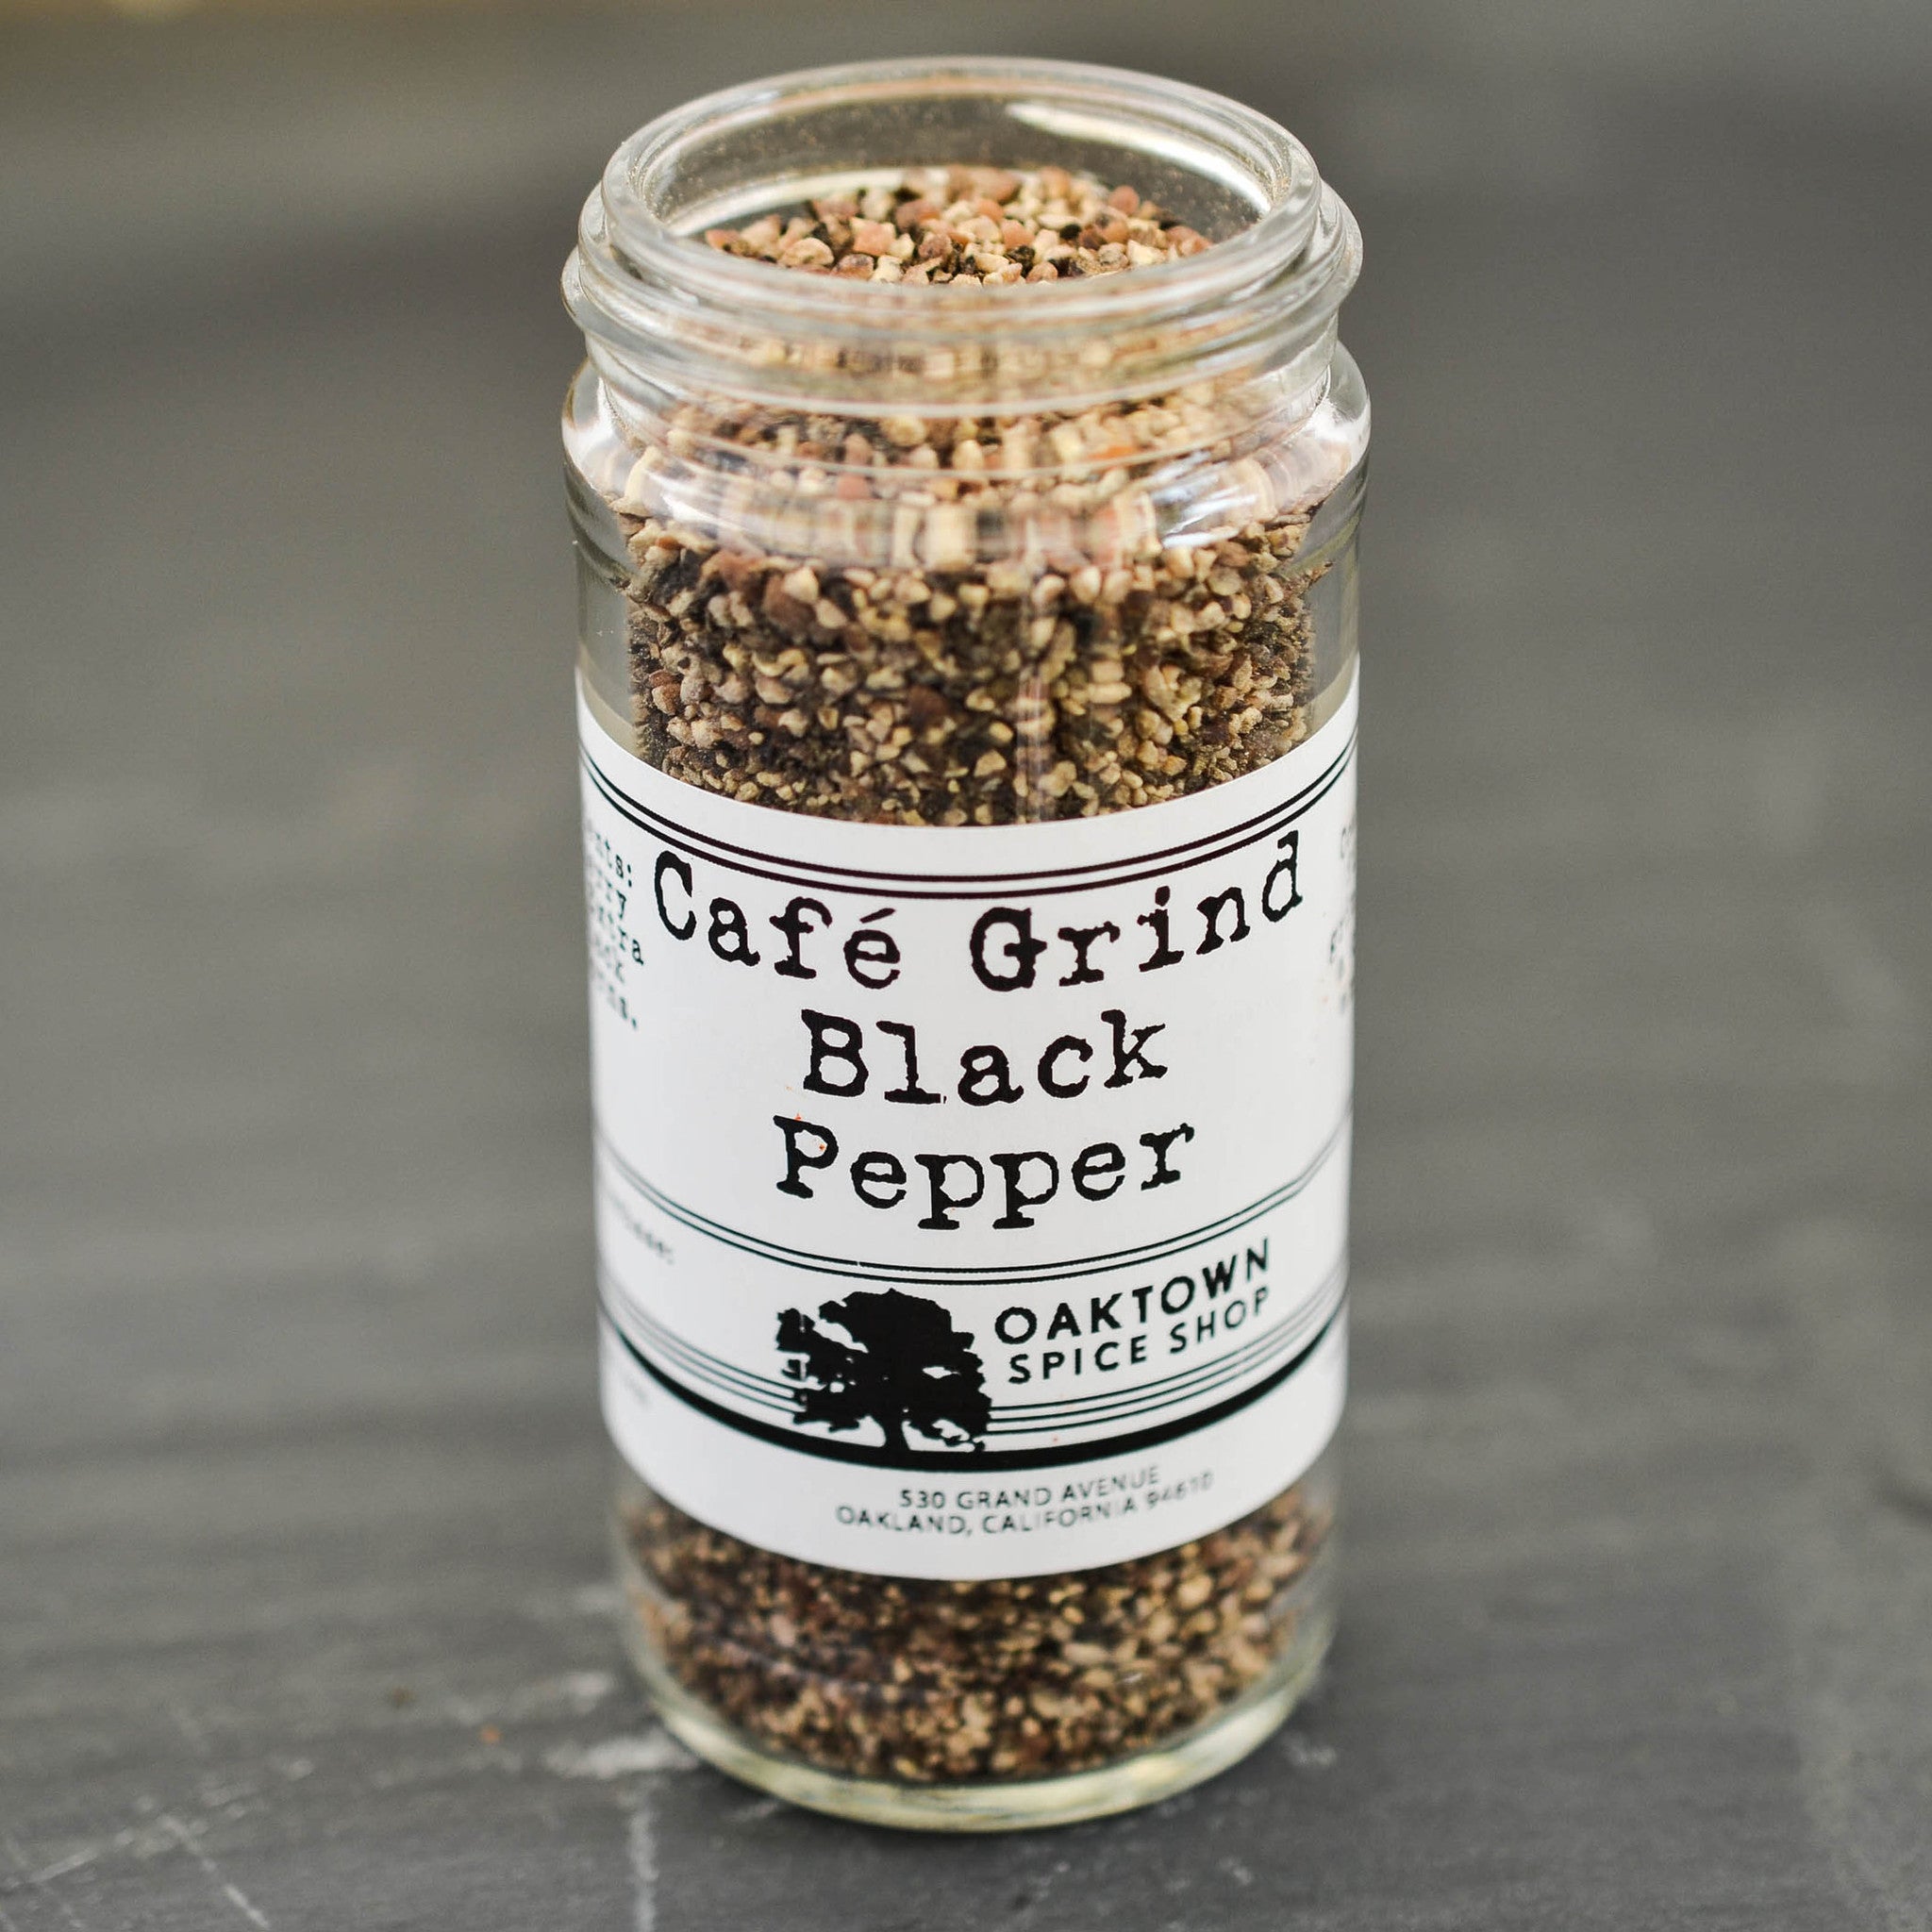 Cafe Grind Black Pepper is Coarse-ground from our premium Tellicherry black peppercorns this pepper is extra bold from Oaktown Spice Shop